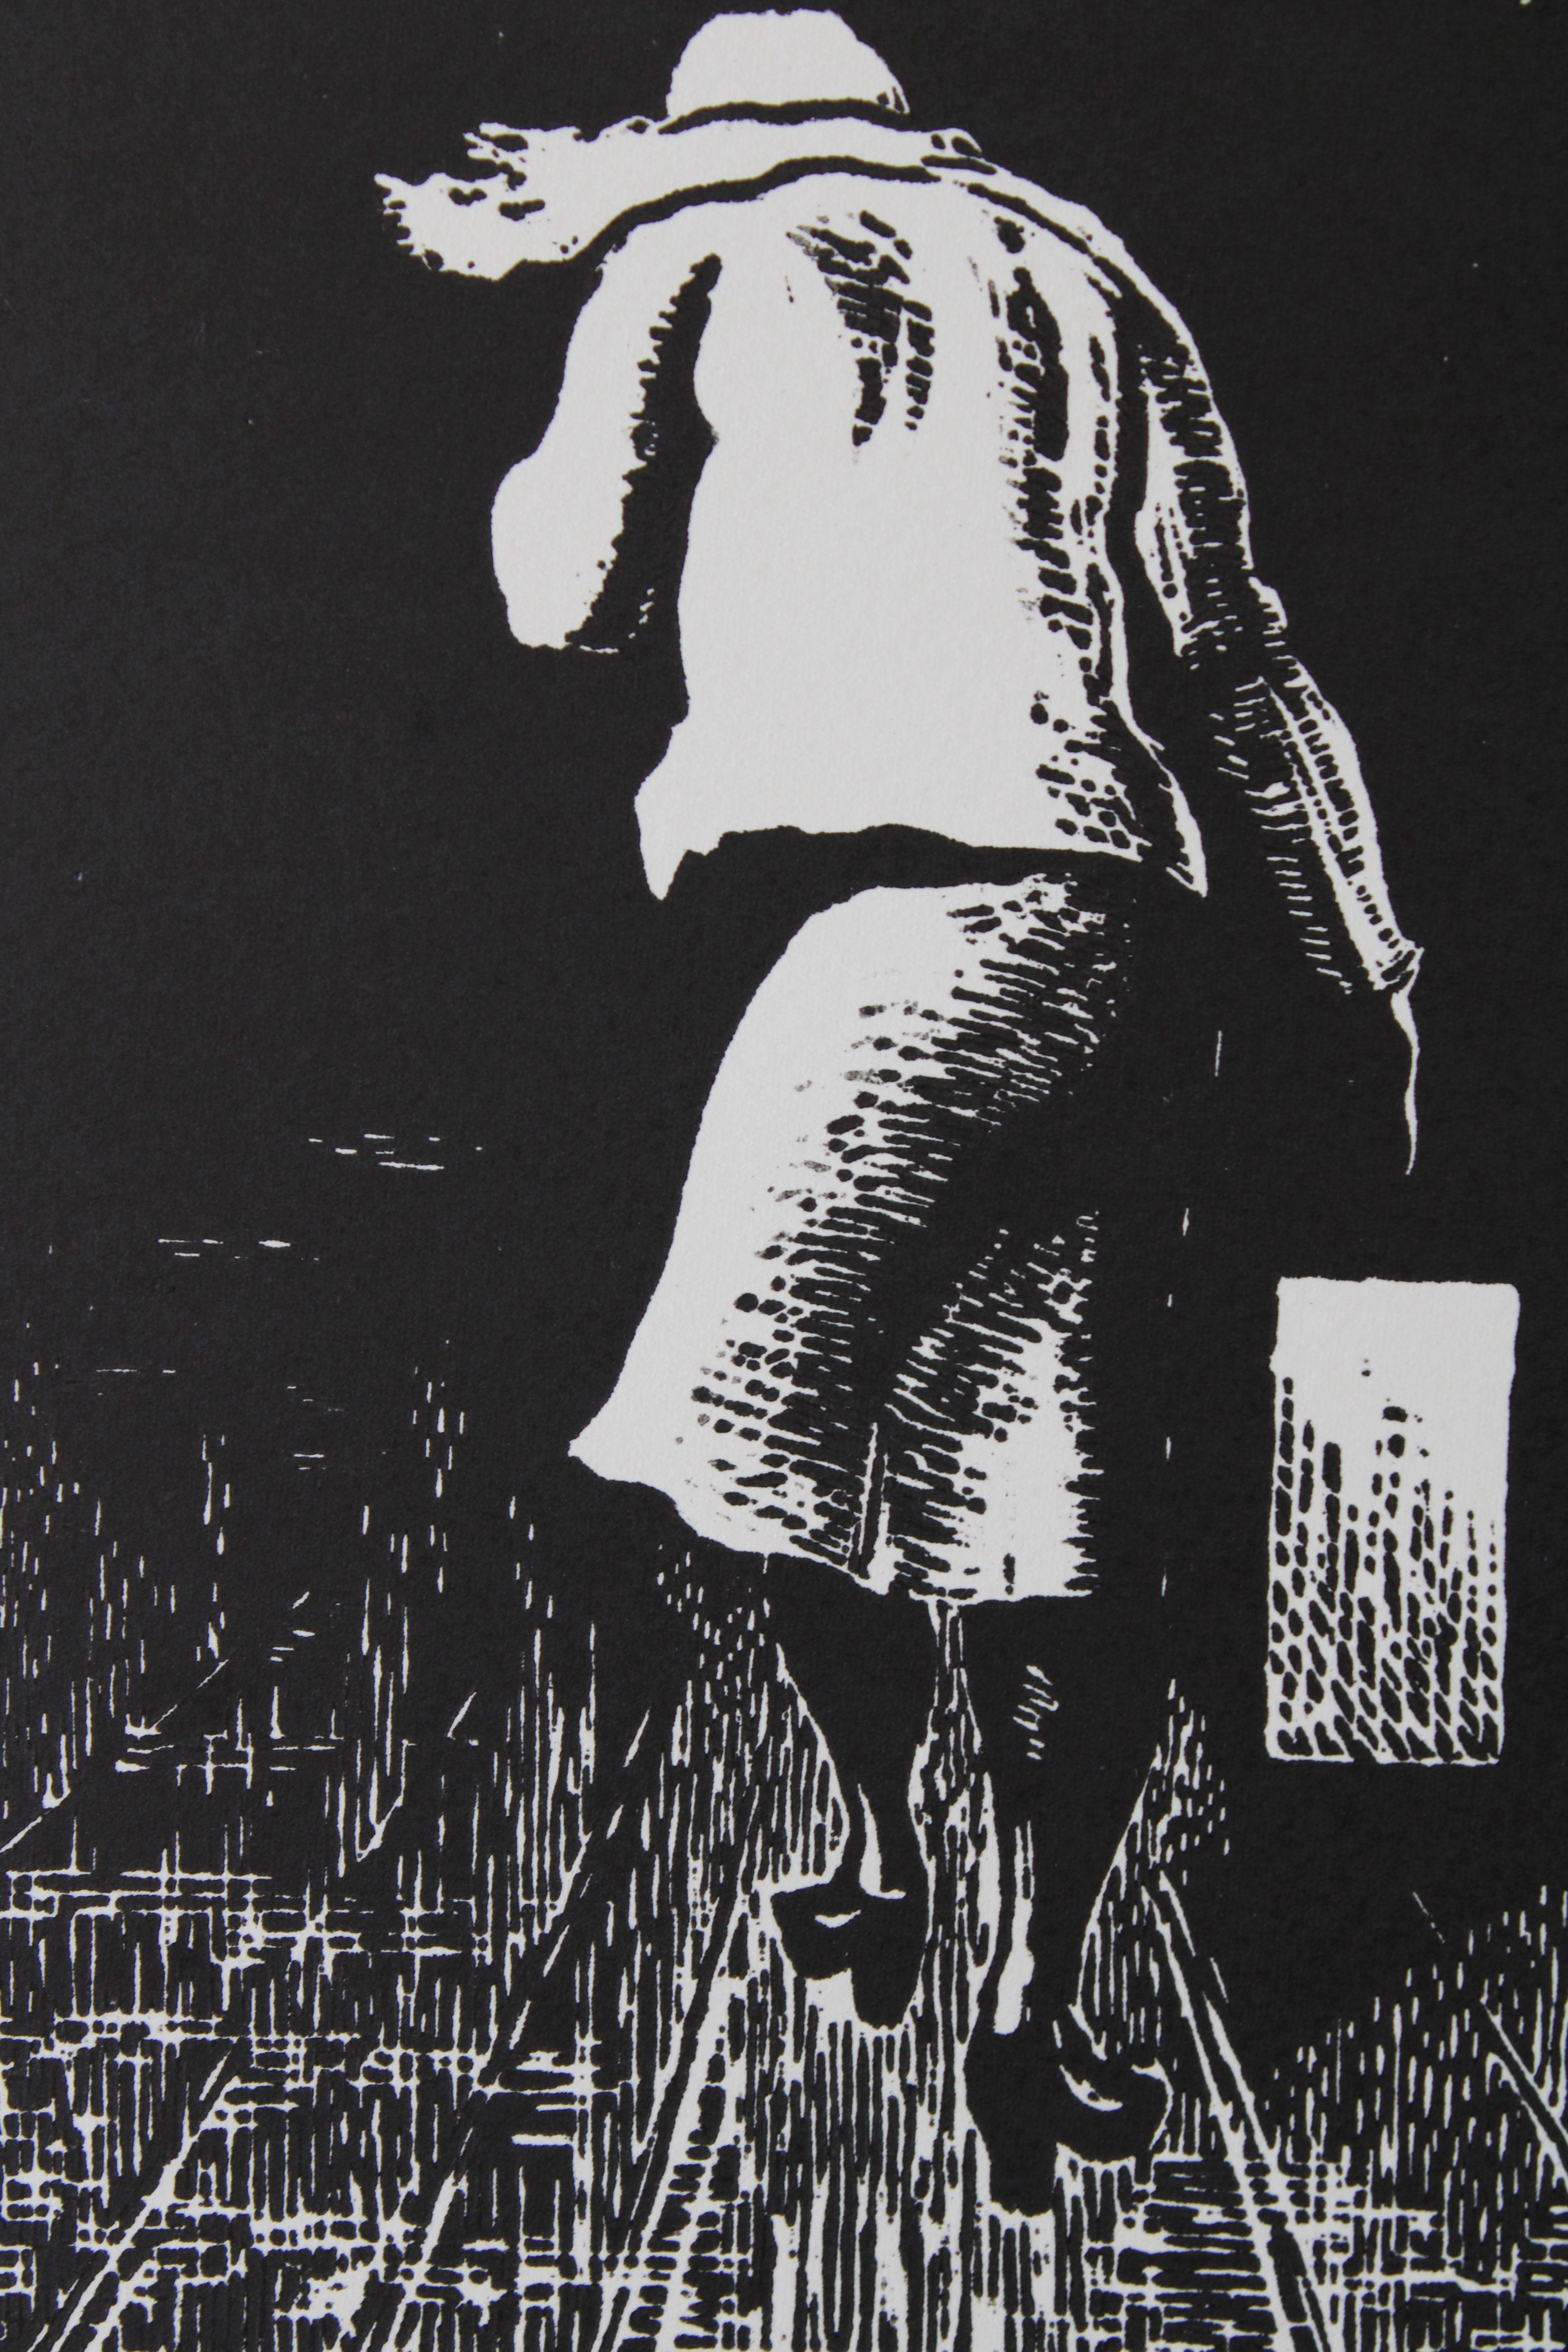 Diptych

1980. paper, linocut, each artwork 24,5х15 cm

The diptych created in 1980 consists of two linocut prints on paper. Each artwork measures 24.5x15 cm. The subject of the diptych portrays a woman and a man walking away with suitcases. This